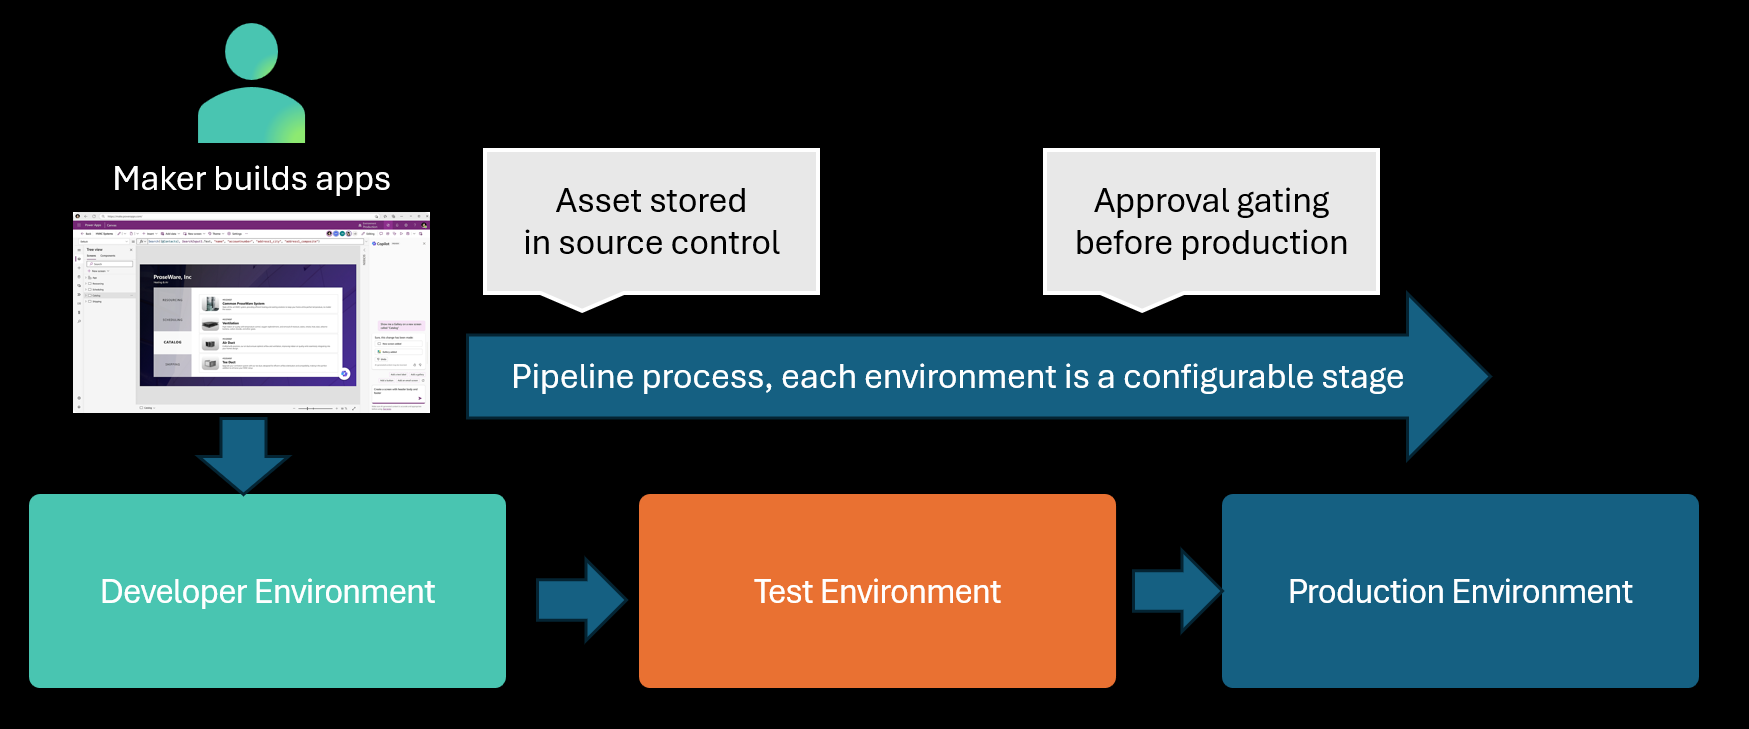 Diagram illustrating a pipeline to automate promoting an asset that's stored in source control from development, through test, to production